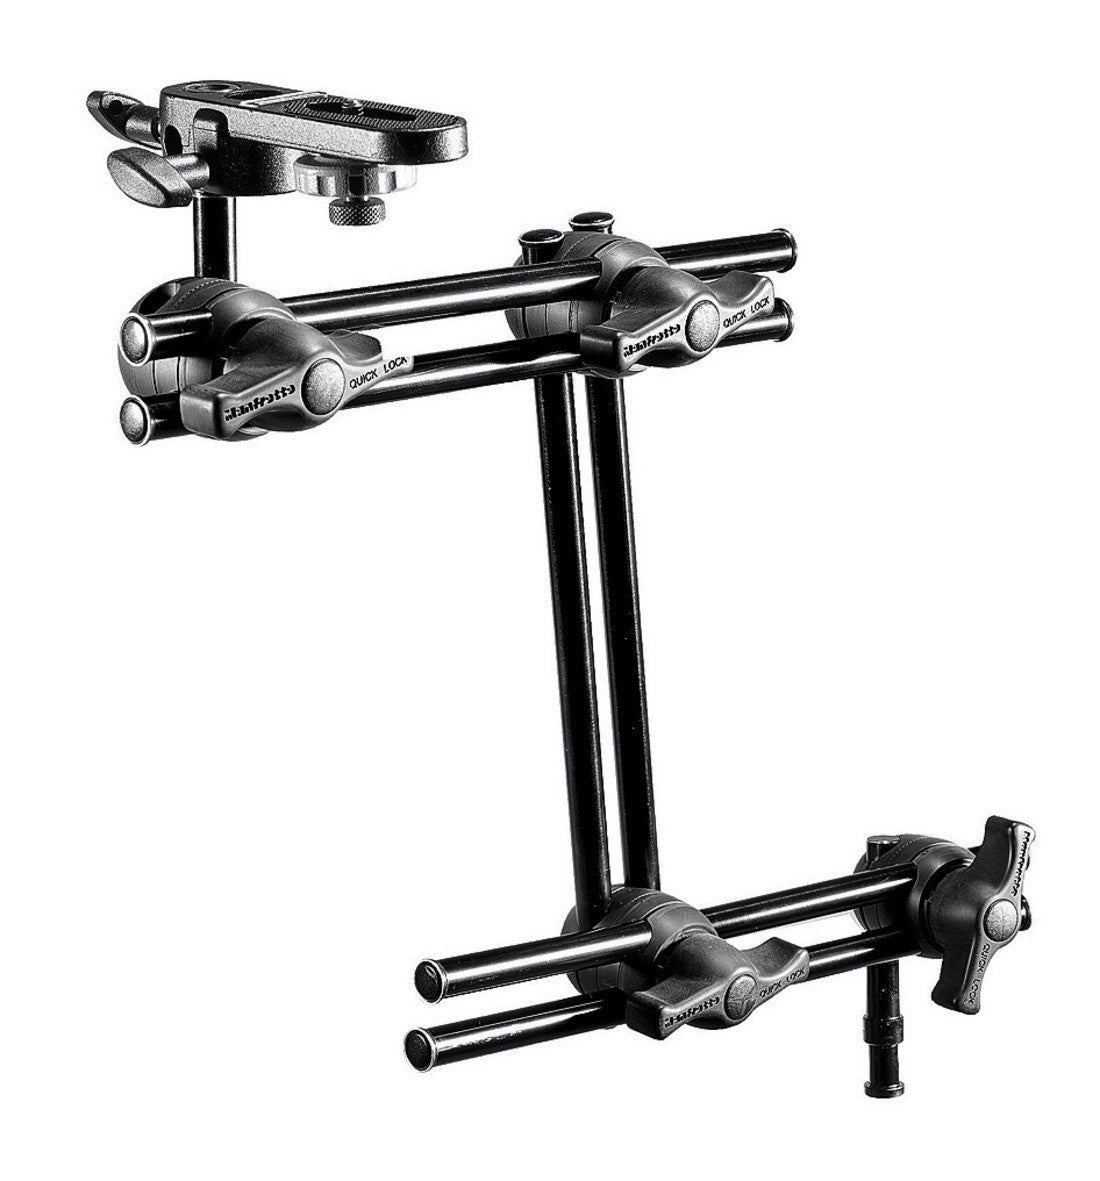 Manfrotto 396B-3 3-Section Double Articulated Arm With Camera Bracket, supports general accessories, Manfrotto - Pictureline 